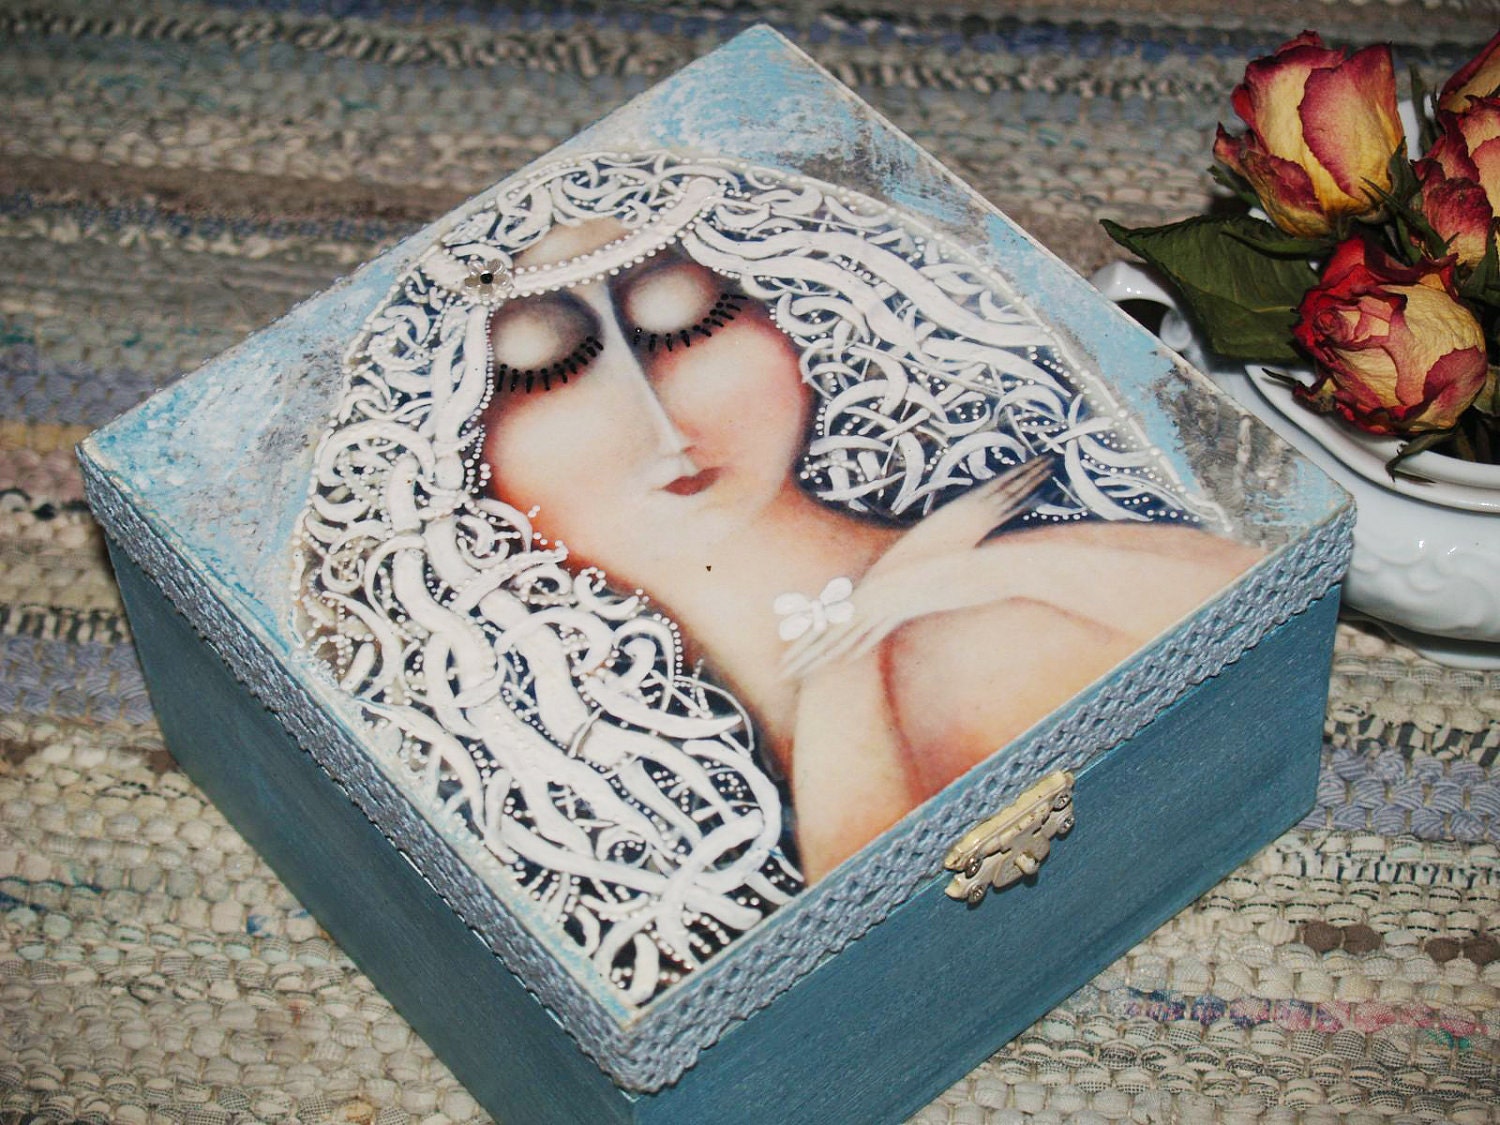 Christmas gift Jewelry box " Helga's winter "  inspired by artist Vladimir Olenberg / Decoupage technique box vintage looking. Shabby chic